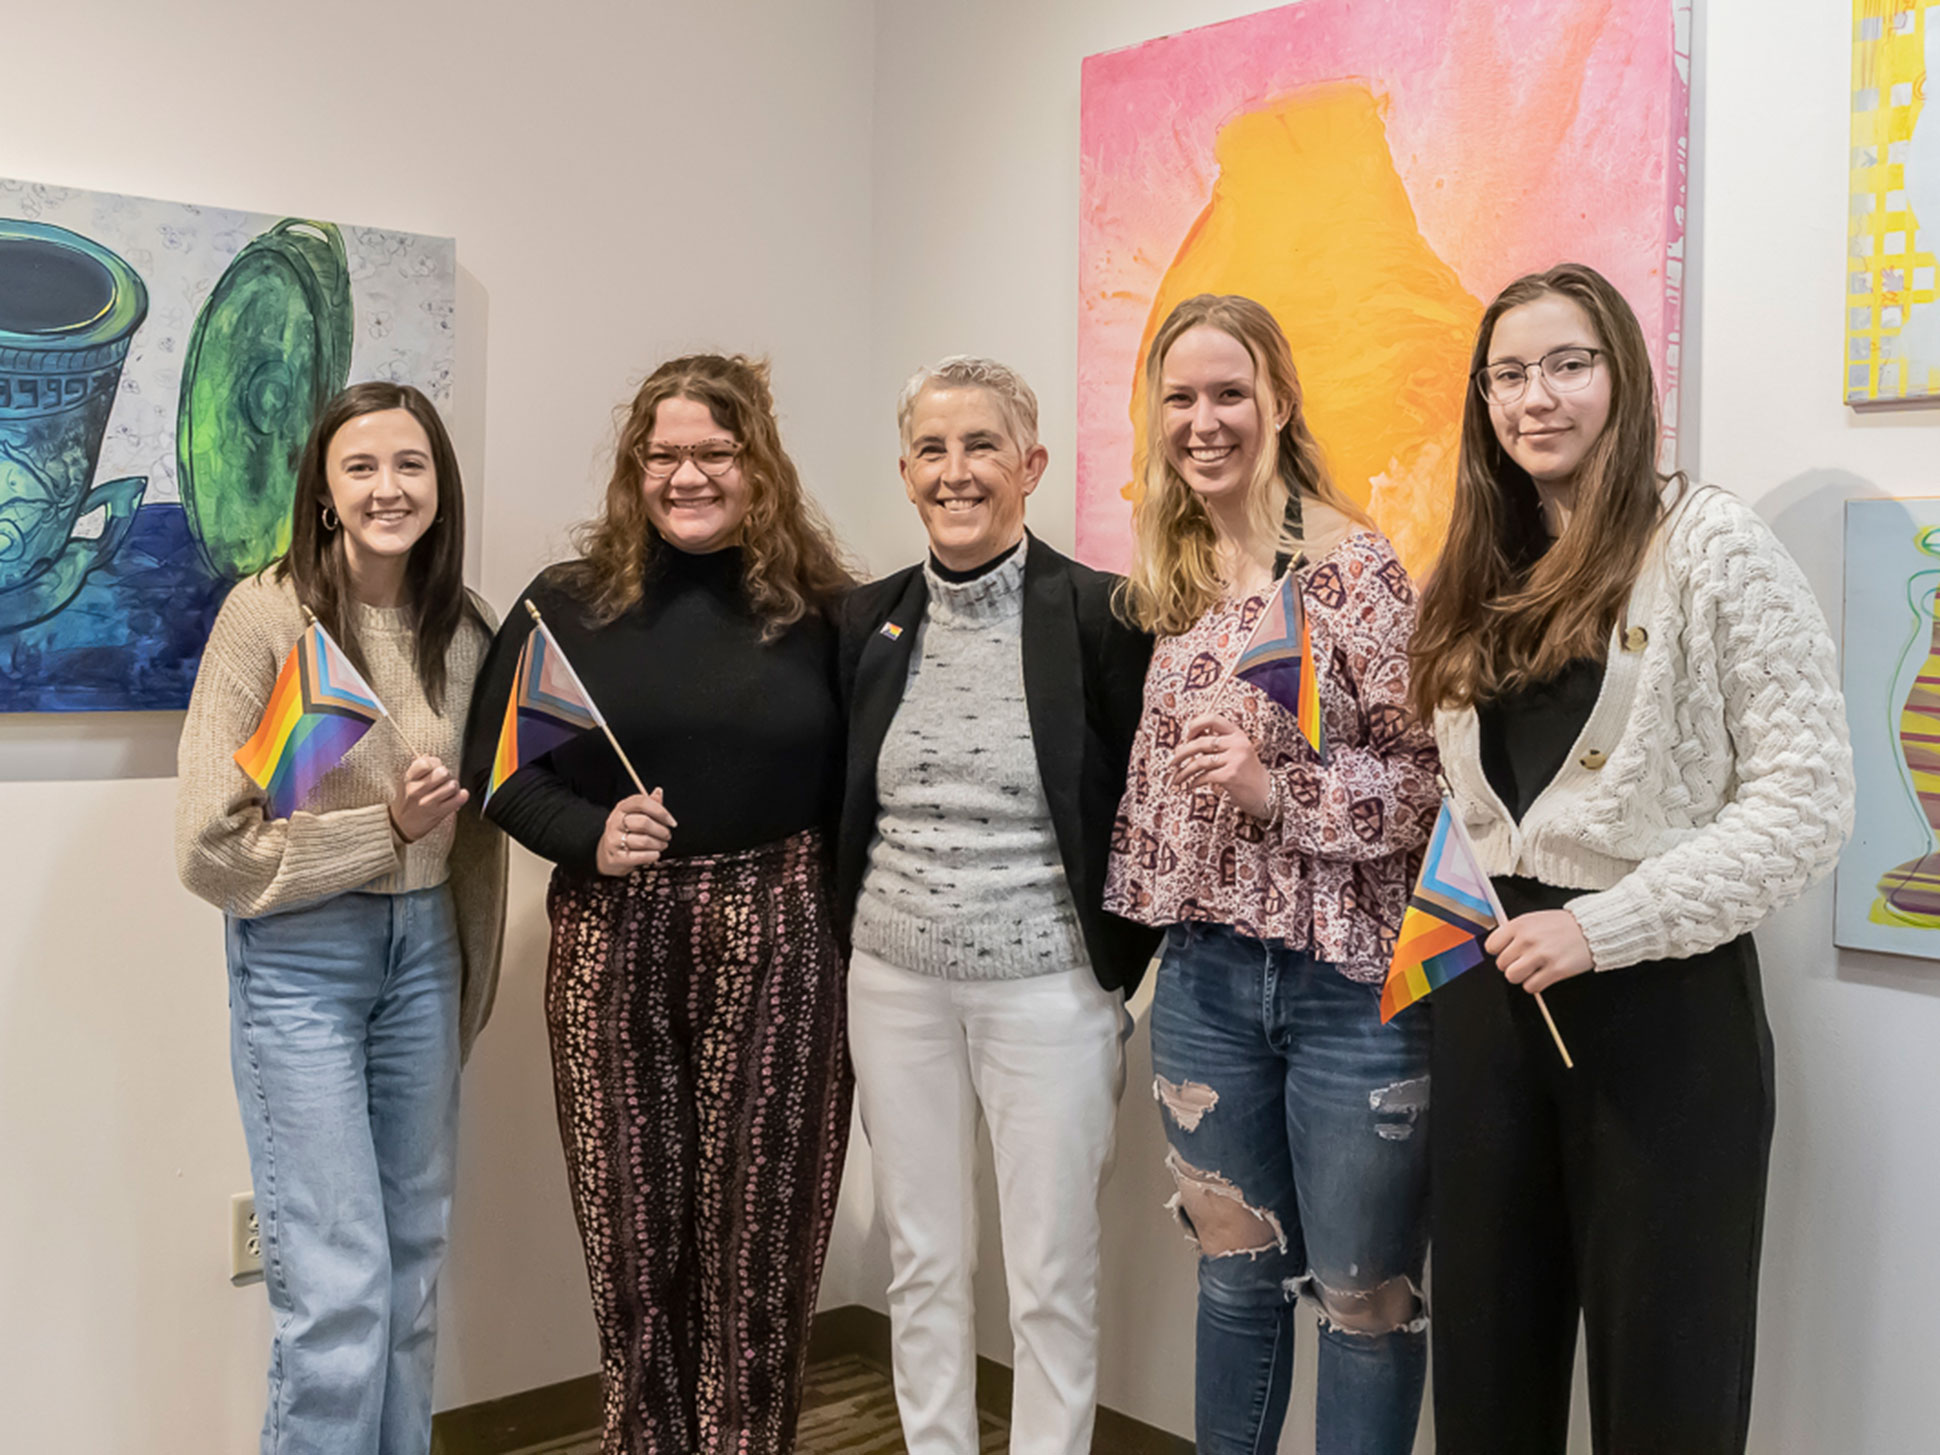 In Juan Carlos Morales’ Junior Graphic Design Studio course at Endicott College, students don’t just design, but work with local nonprofits on real-world campaigns. 